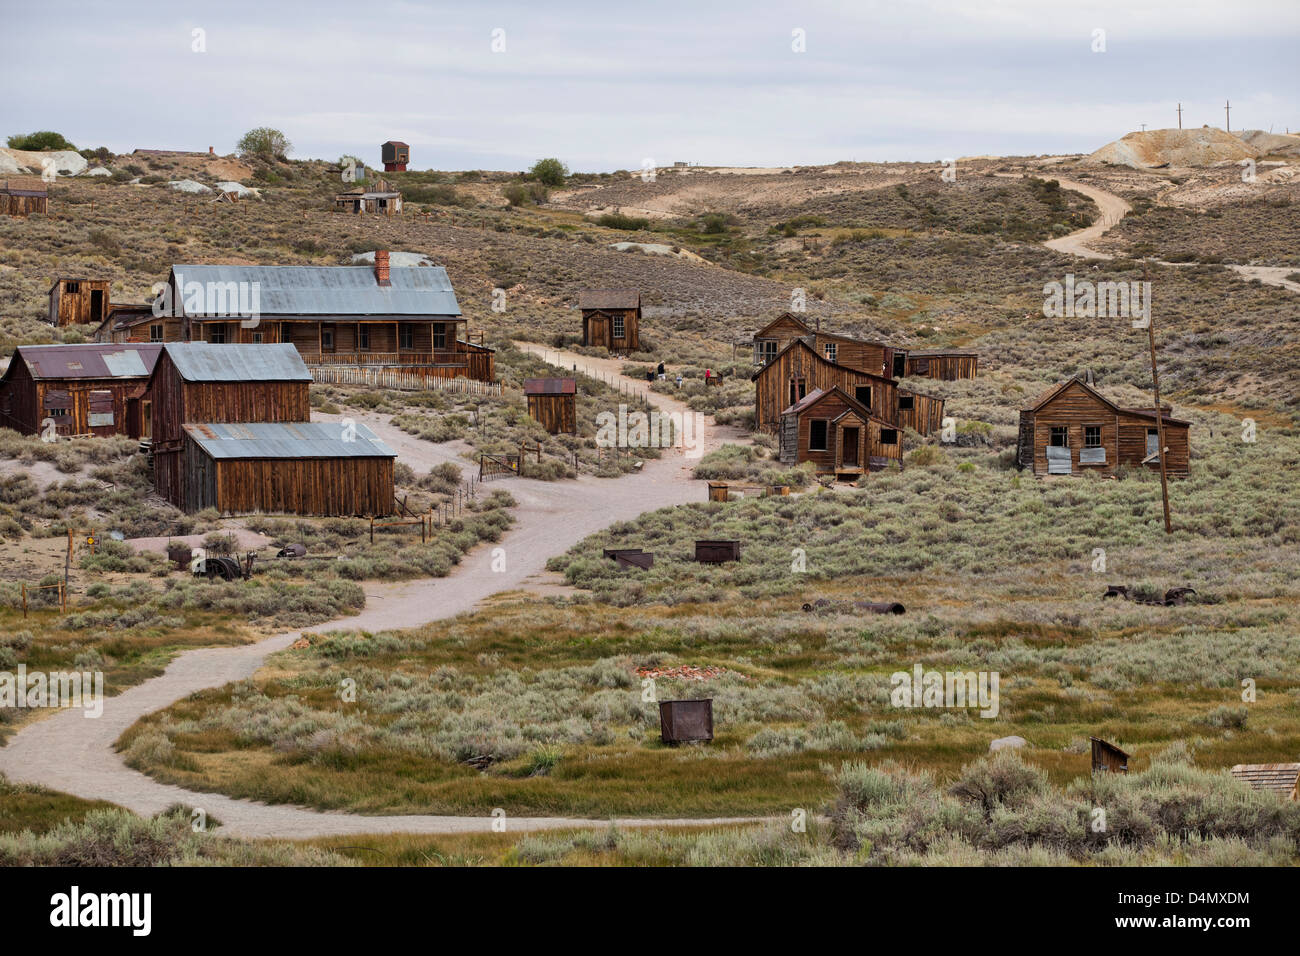 Some old houses at Bodie Ghost Town in California, USA Stock Photo